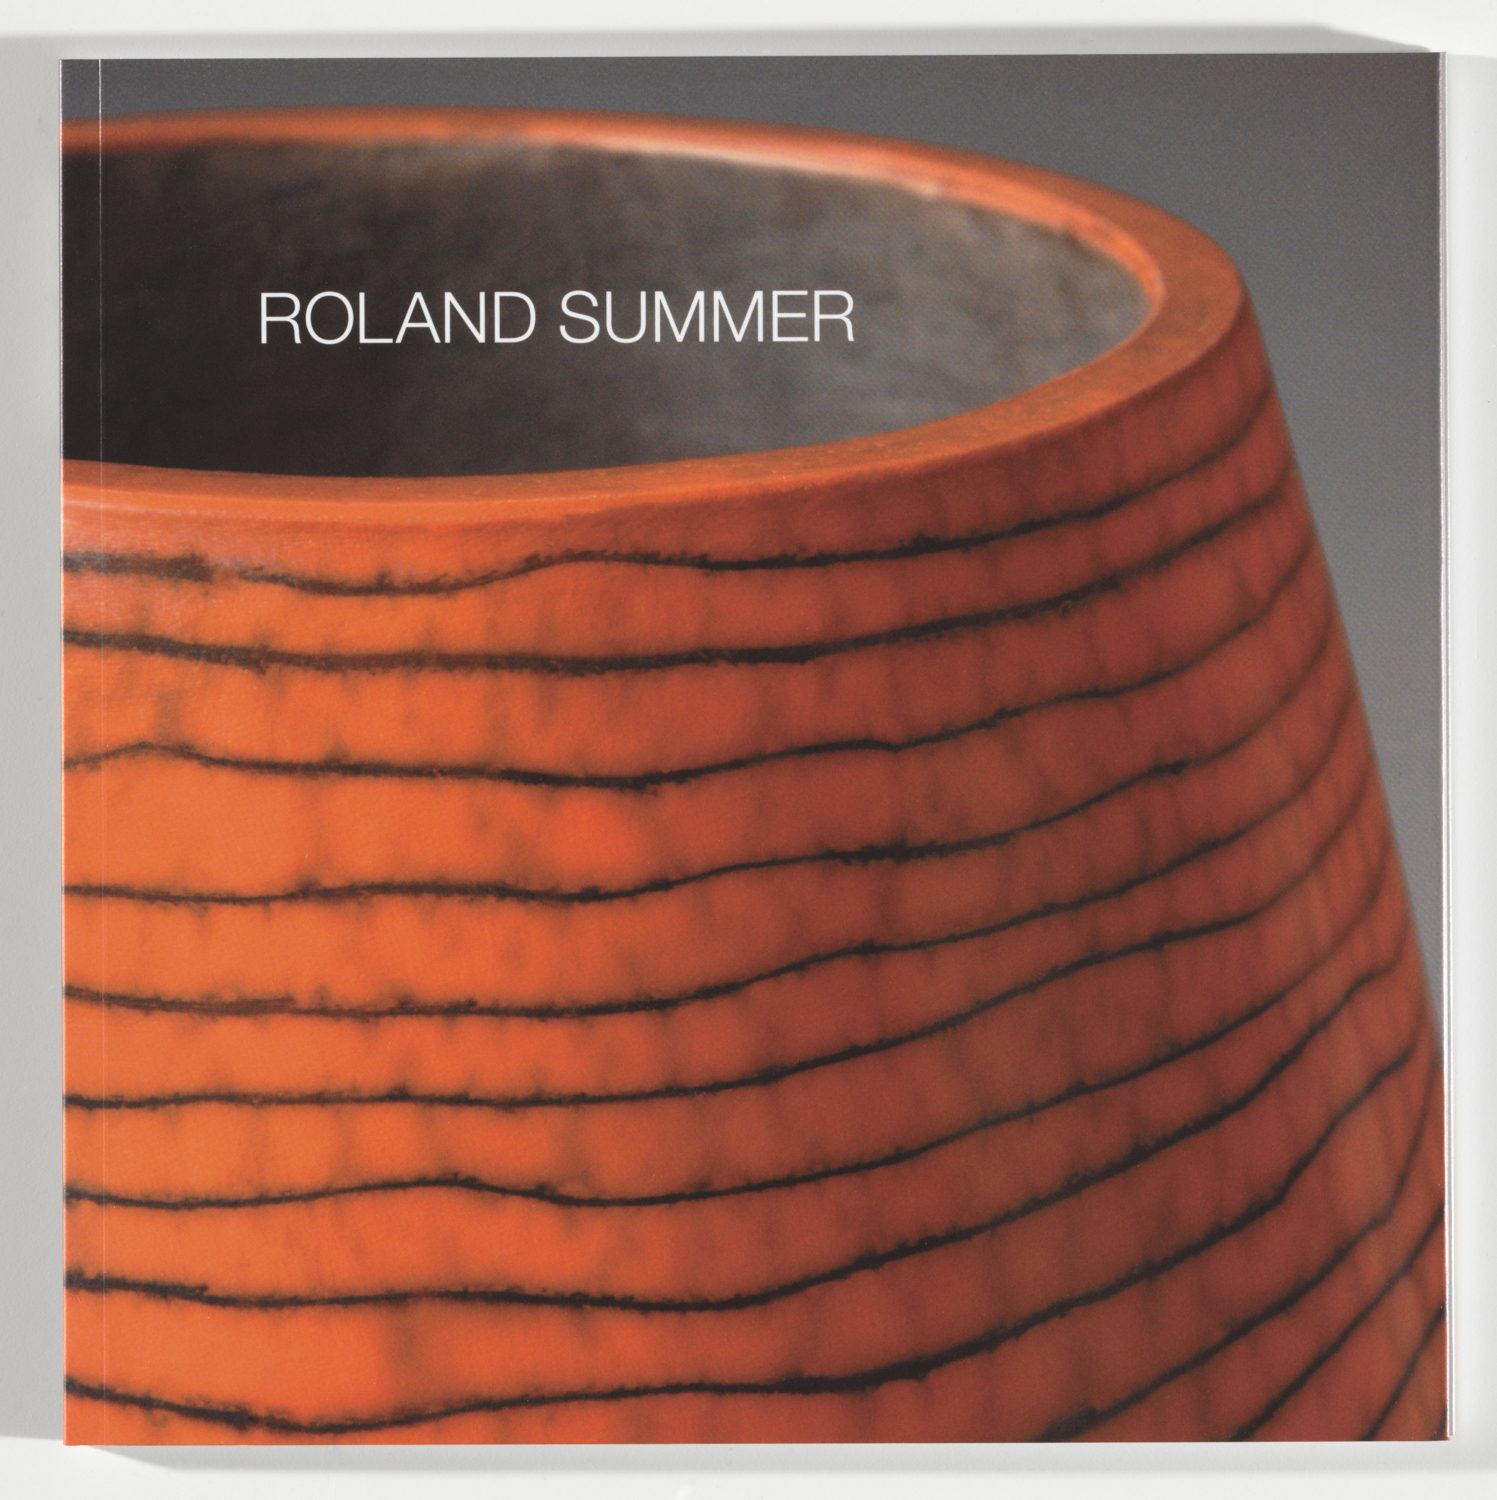 Heavily truncated vase occupying almost the entire picture, terracotta-coloured with black, slightly wavy horizintal lines. Inner glaze, dark grey, with the inscription: Roland Summer.